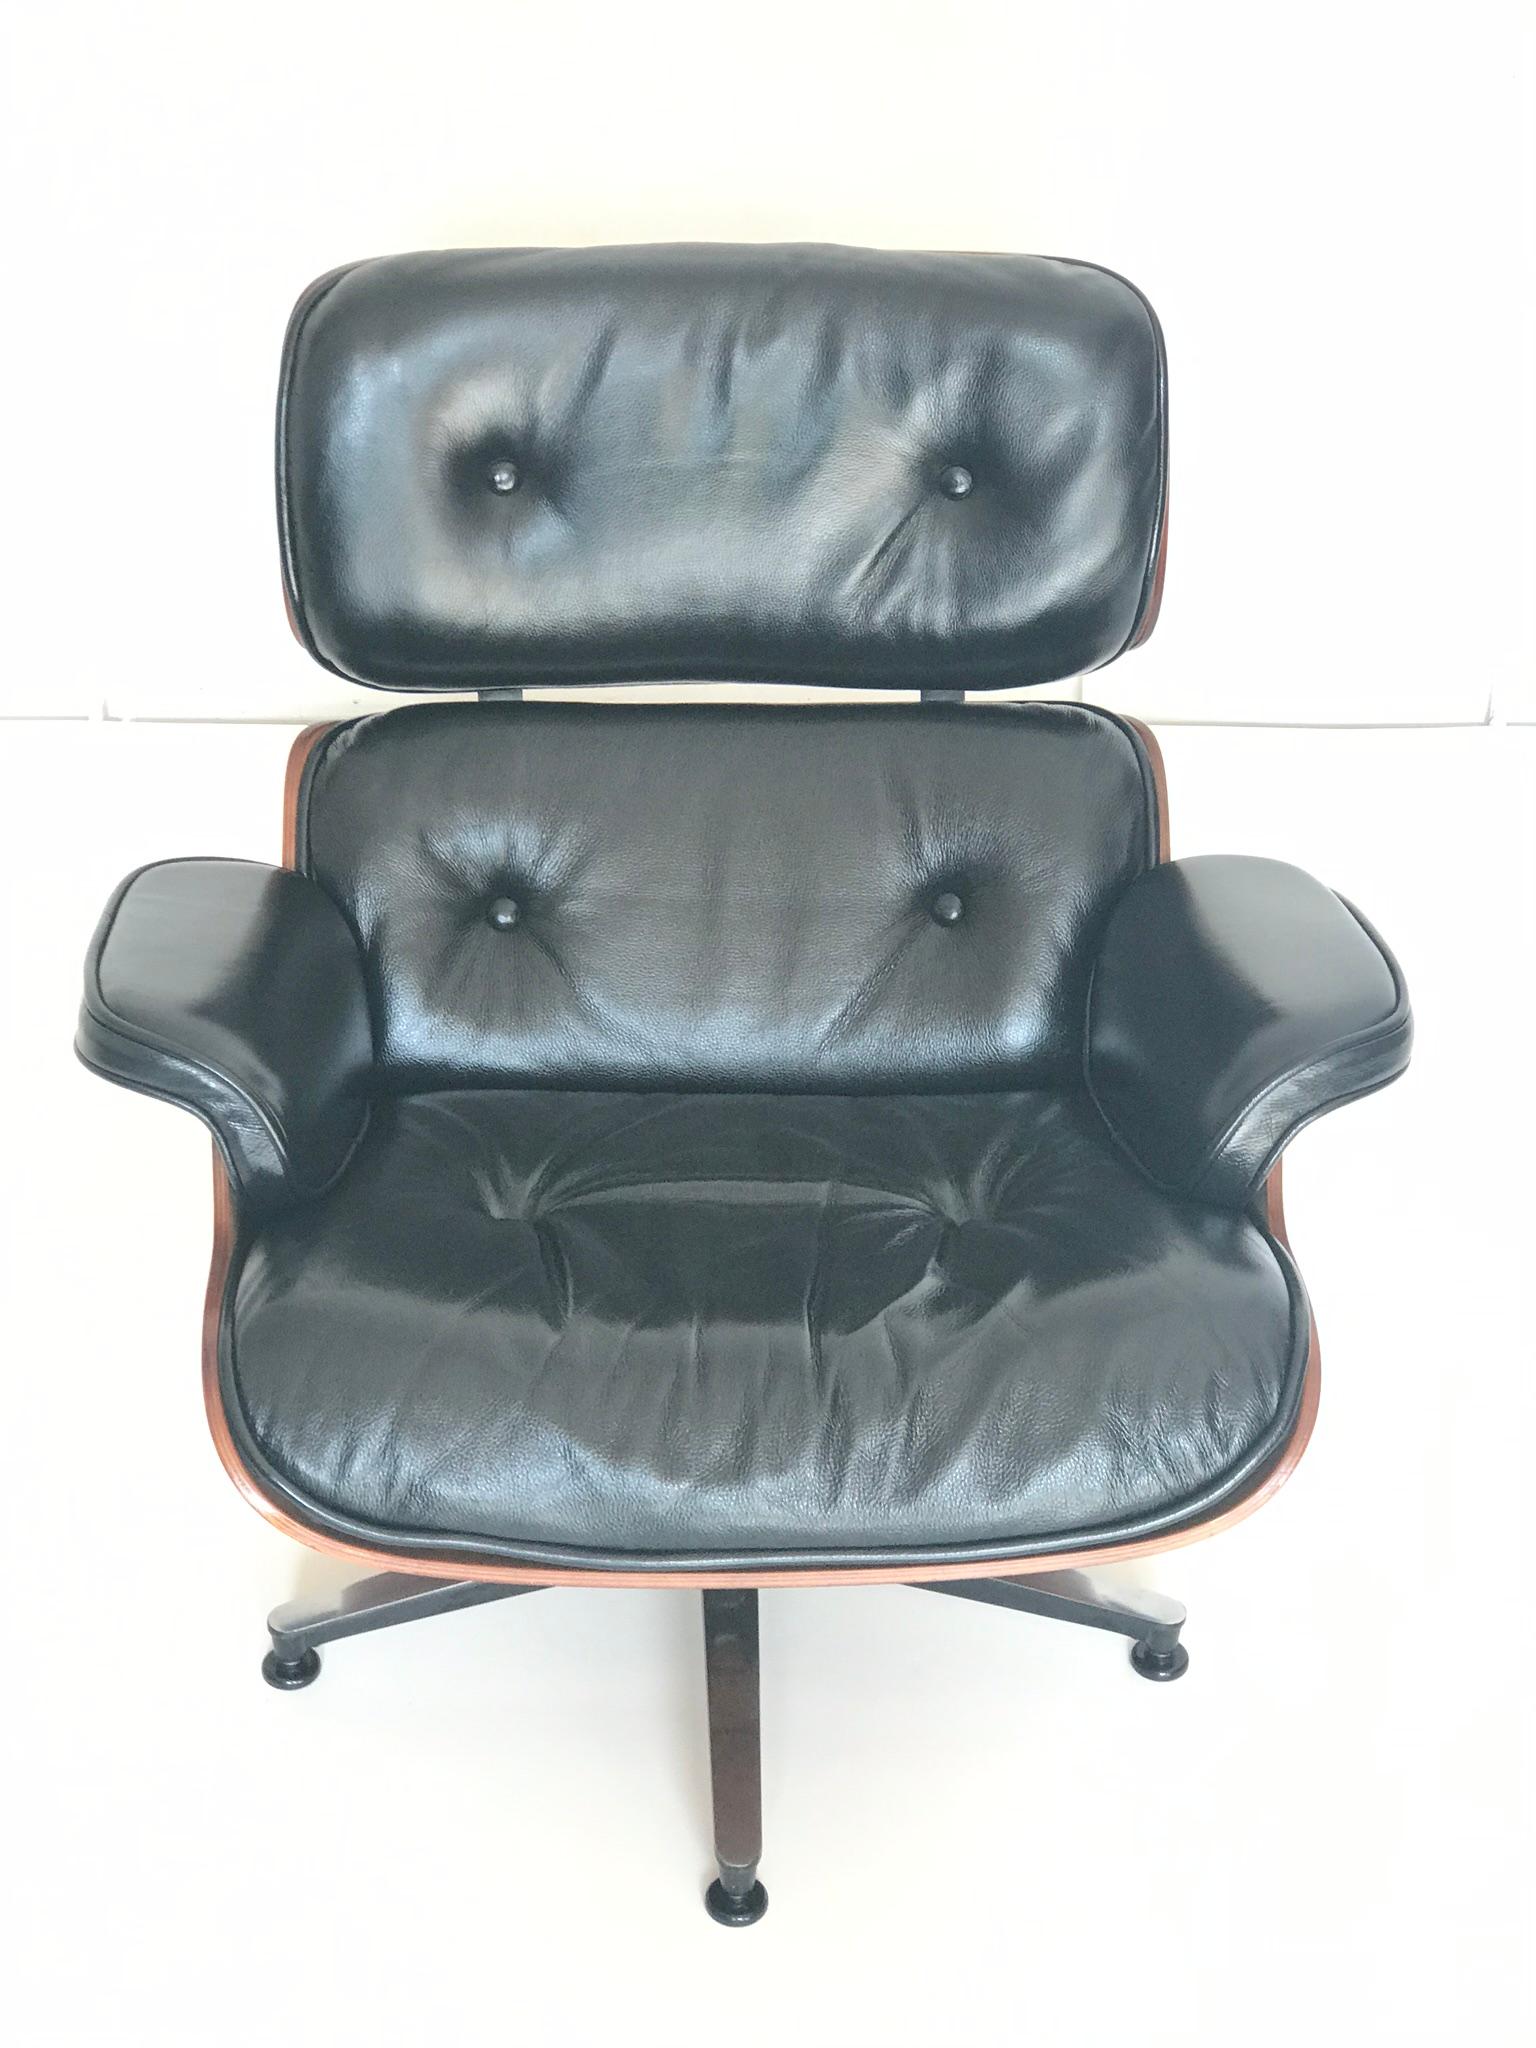 Edition Herman Miller. The chair and the ottoman is in a very good condition. Nuts wood and black leather in the original patina.